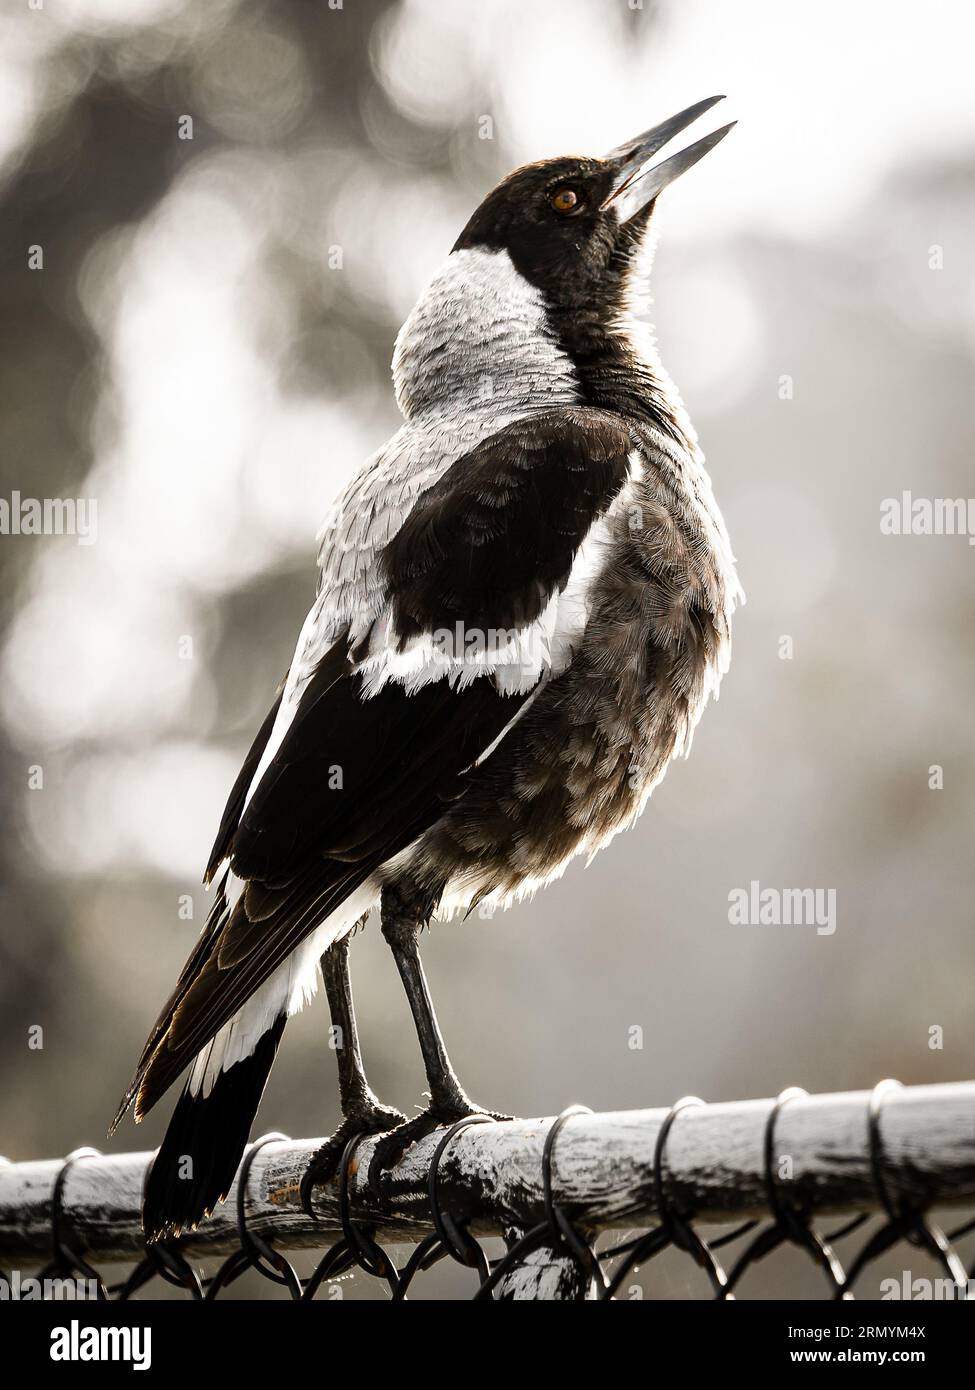 A young Australian magpie singing Stock Photo